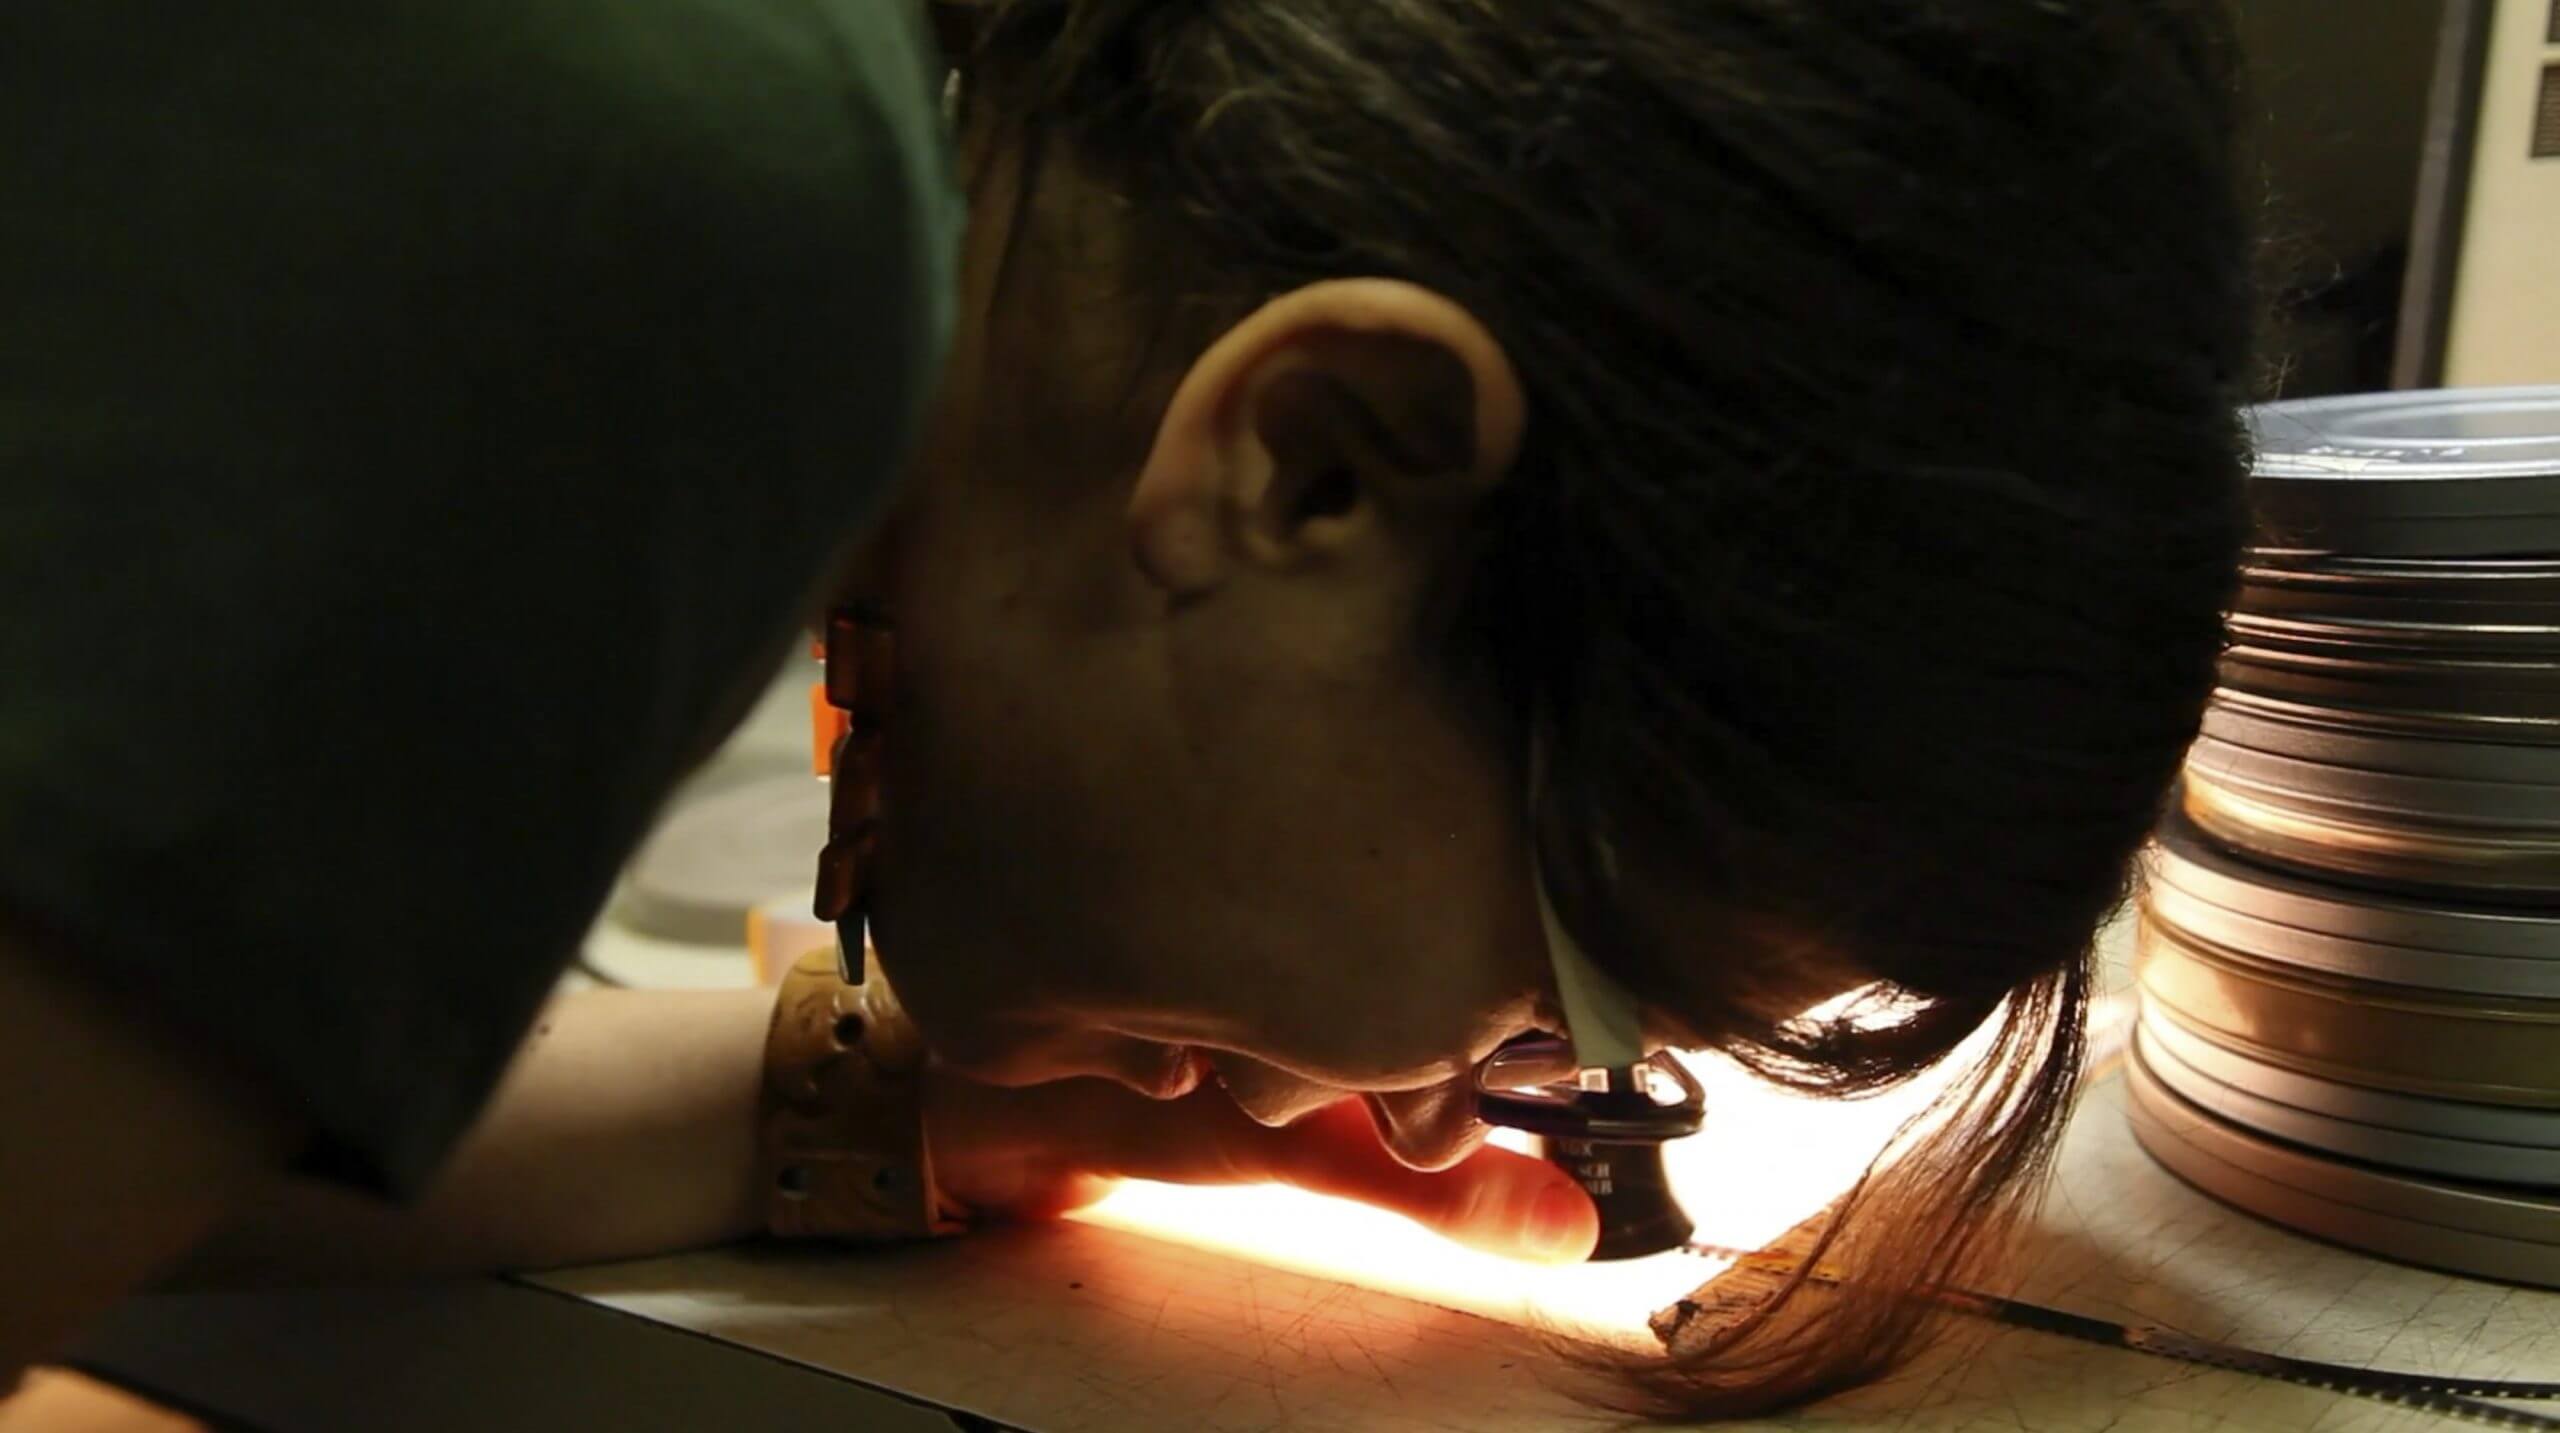 Still from A Photographic Memory. A woman is using a special magnifying glass to see a photograph on a light table.